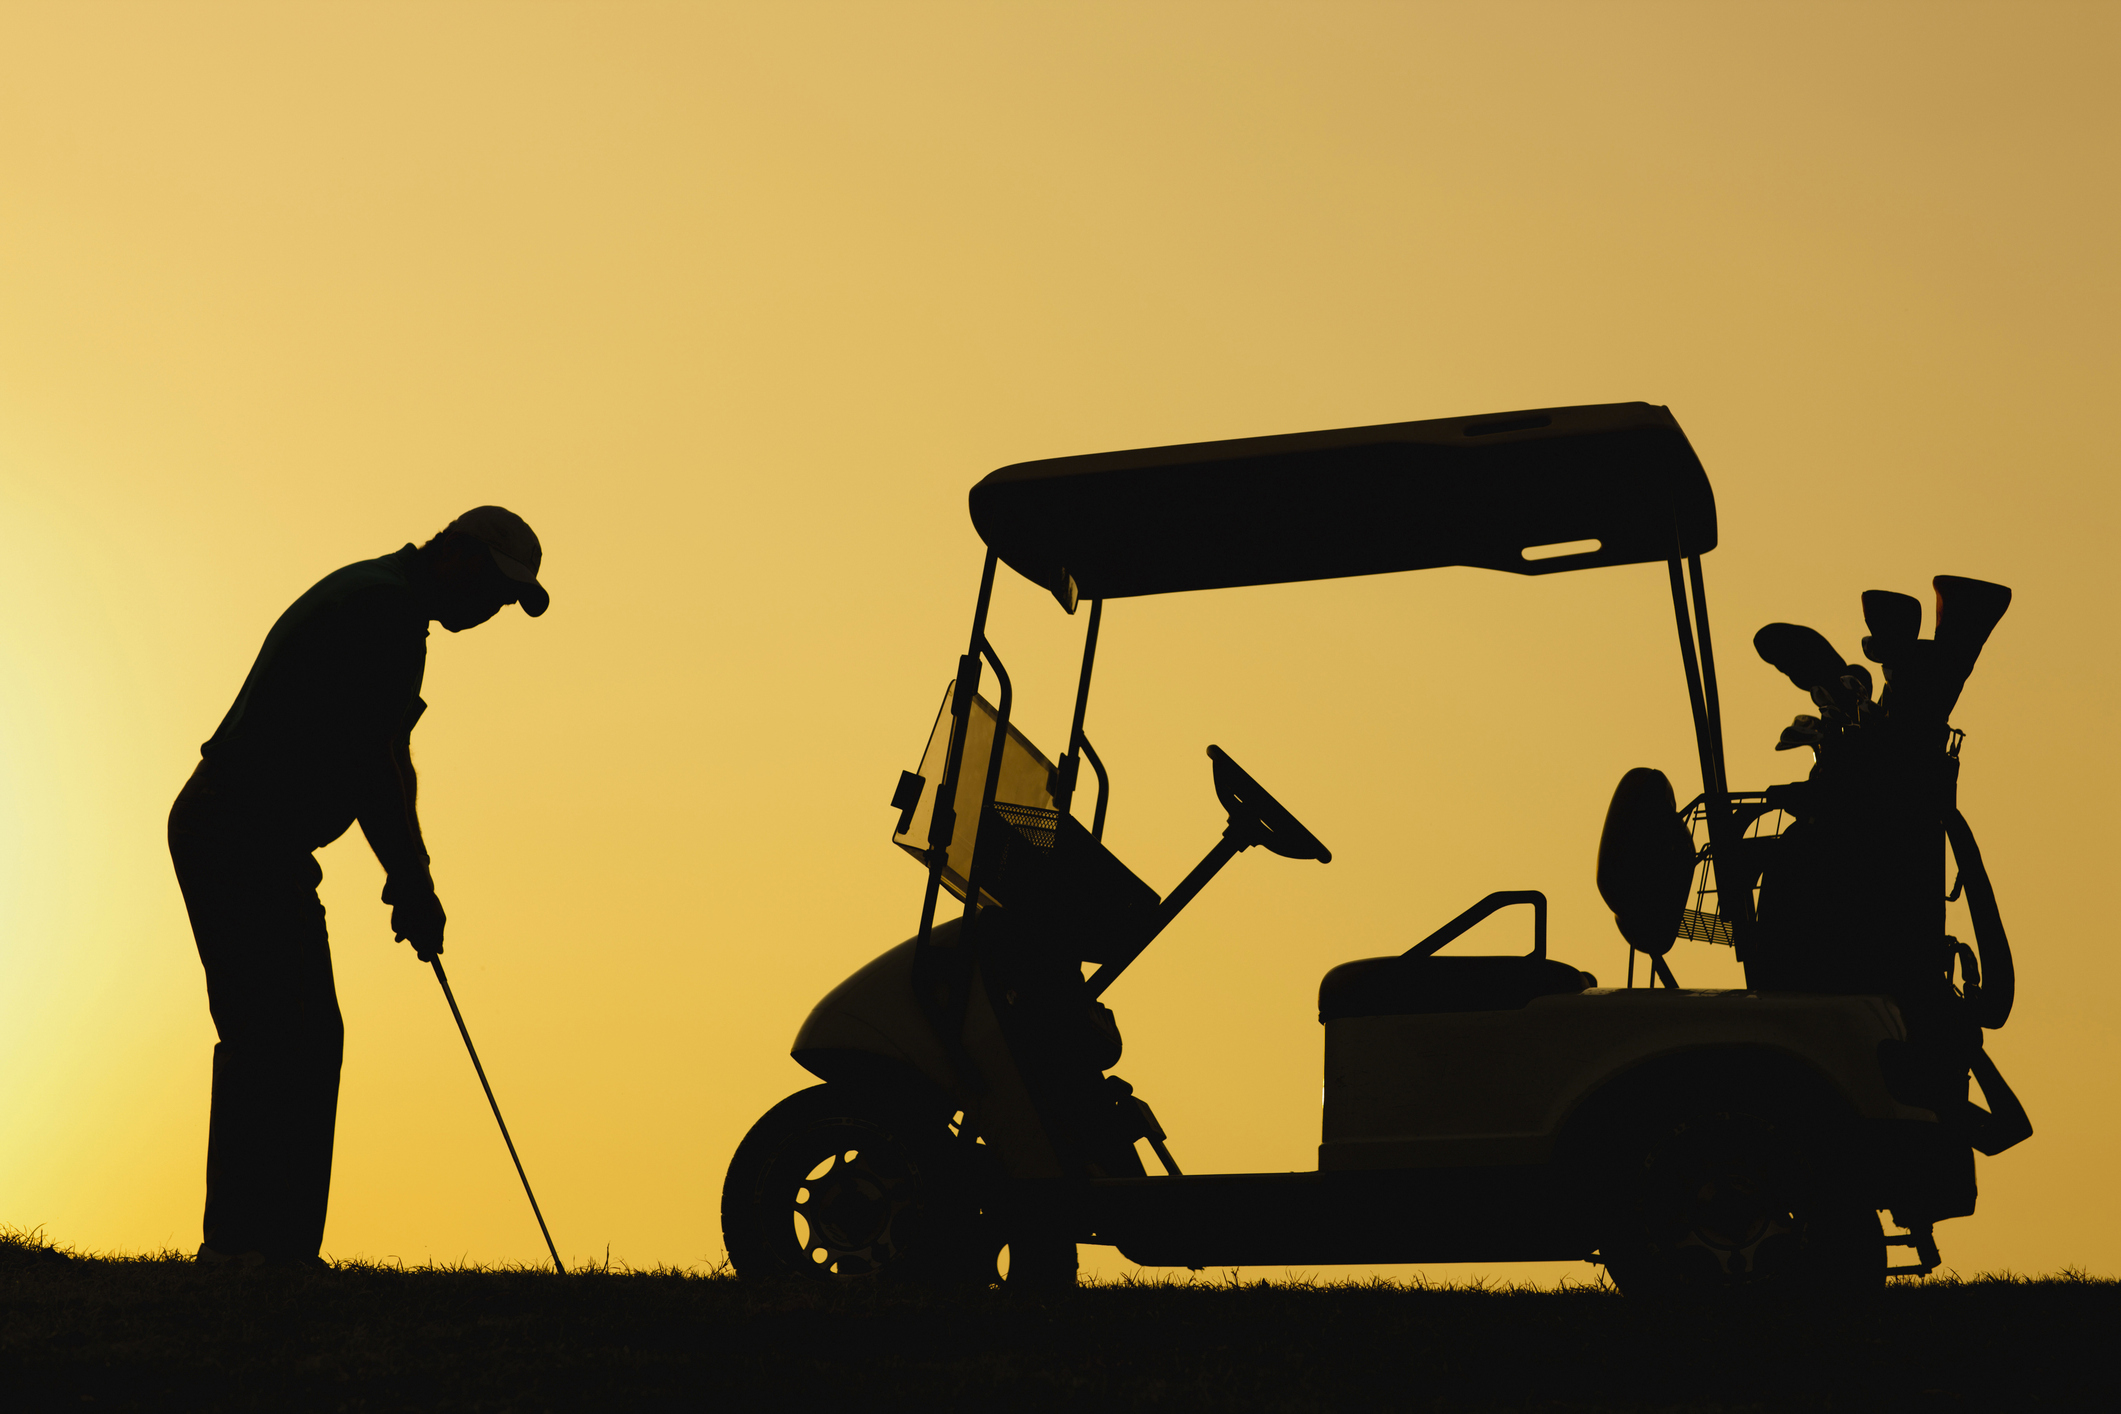 Golf buggies may require motor insurance